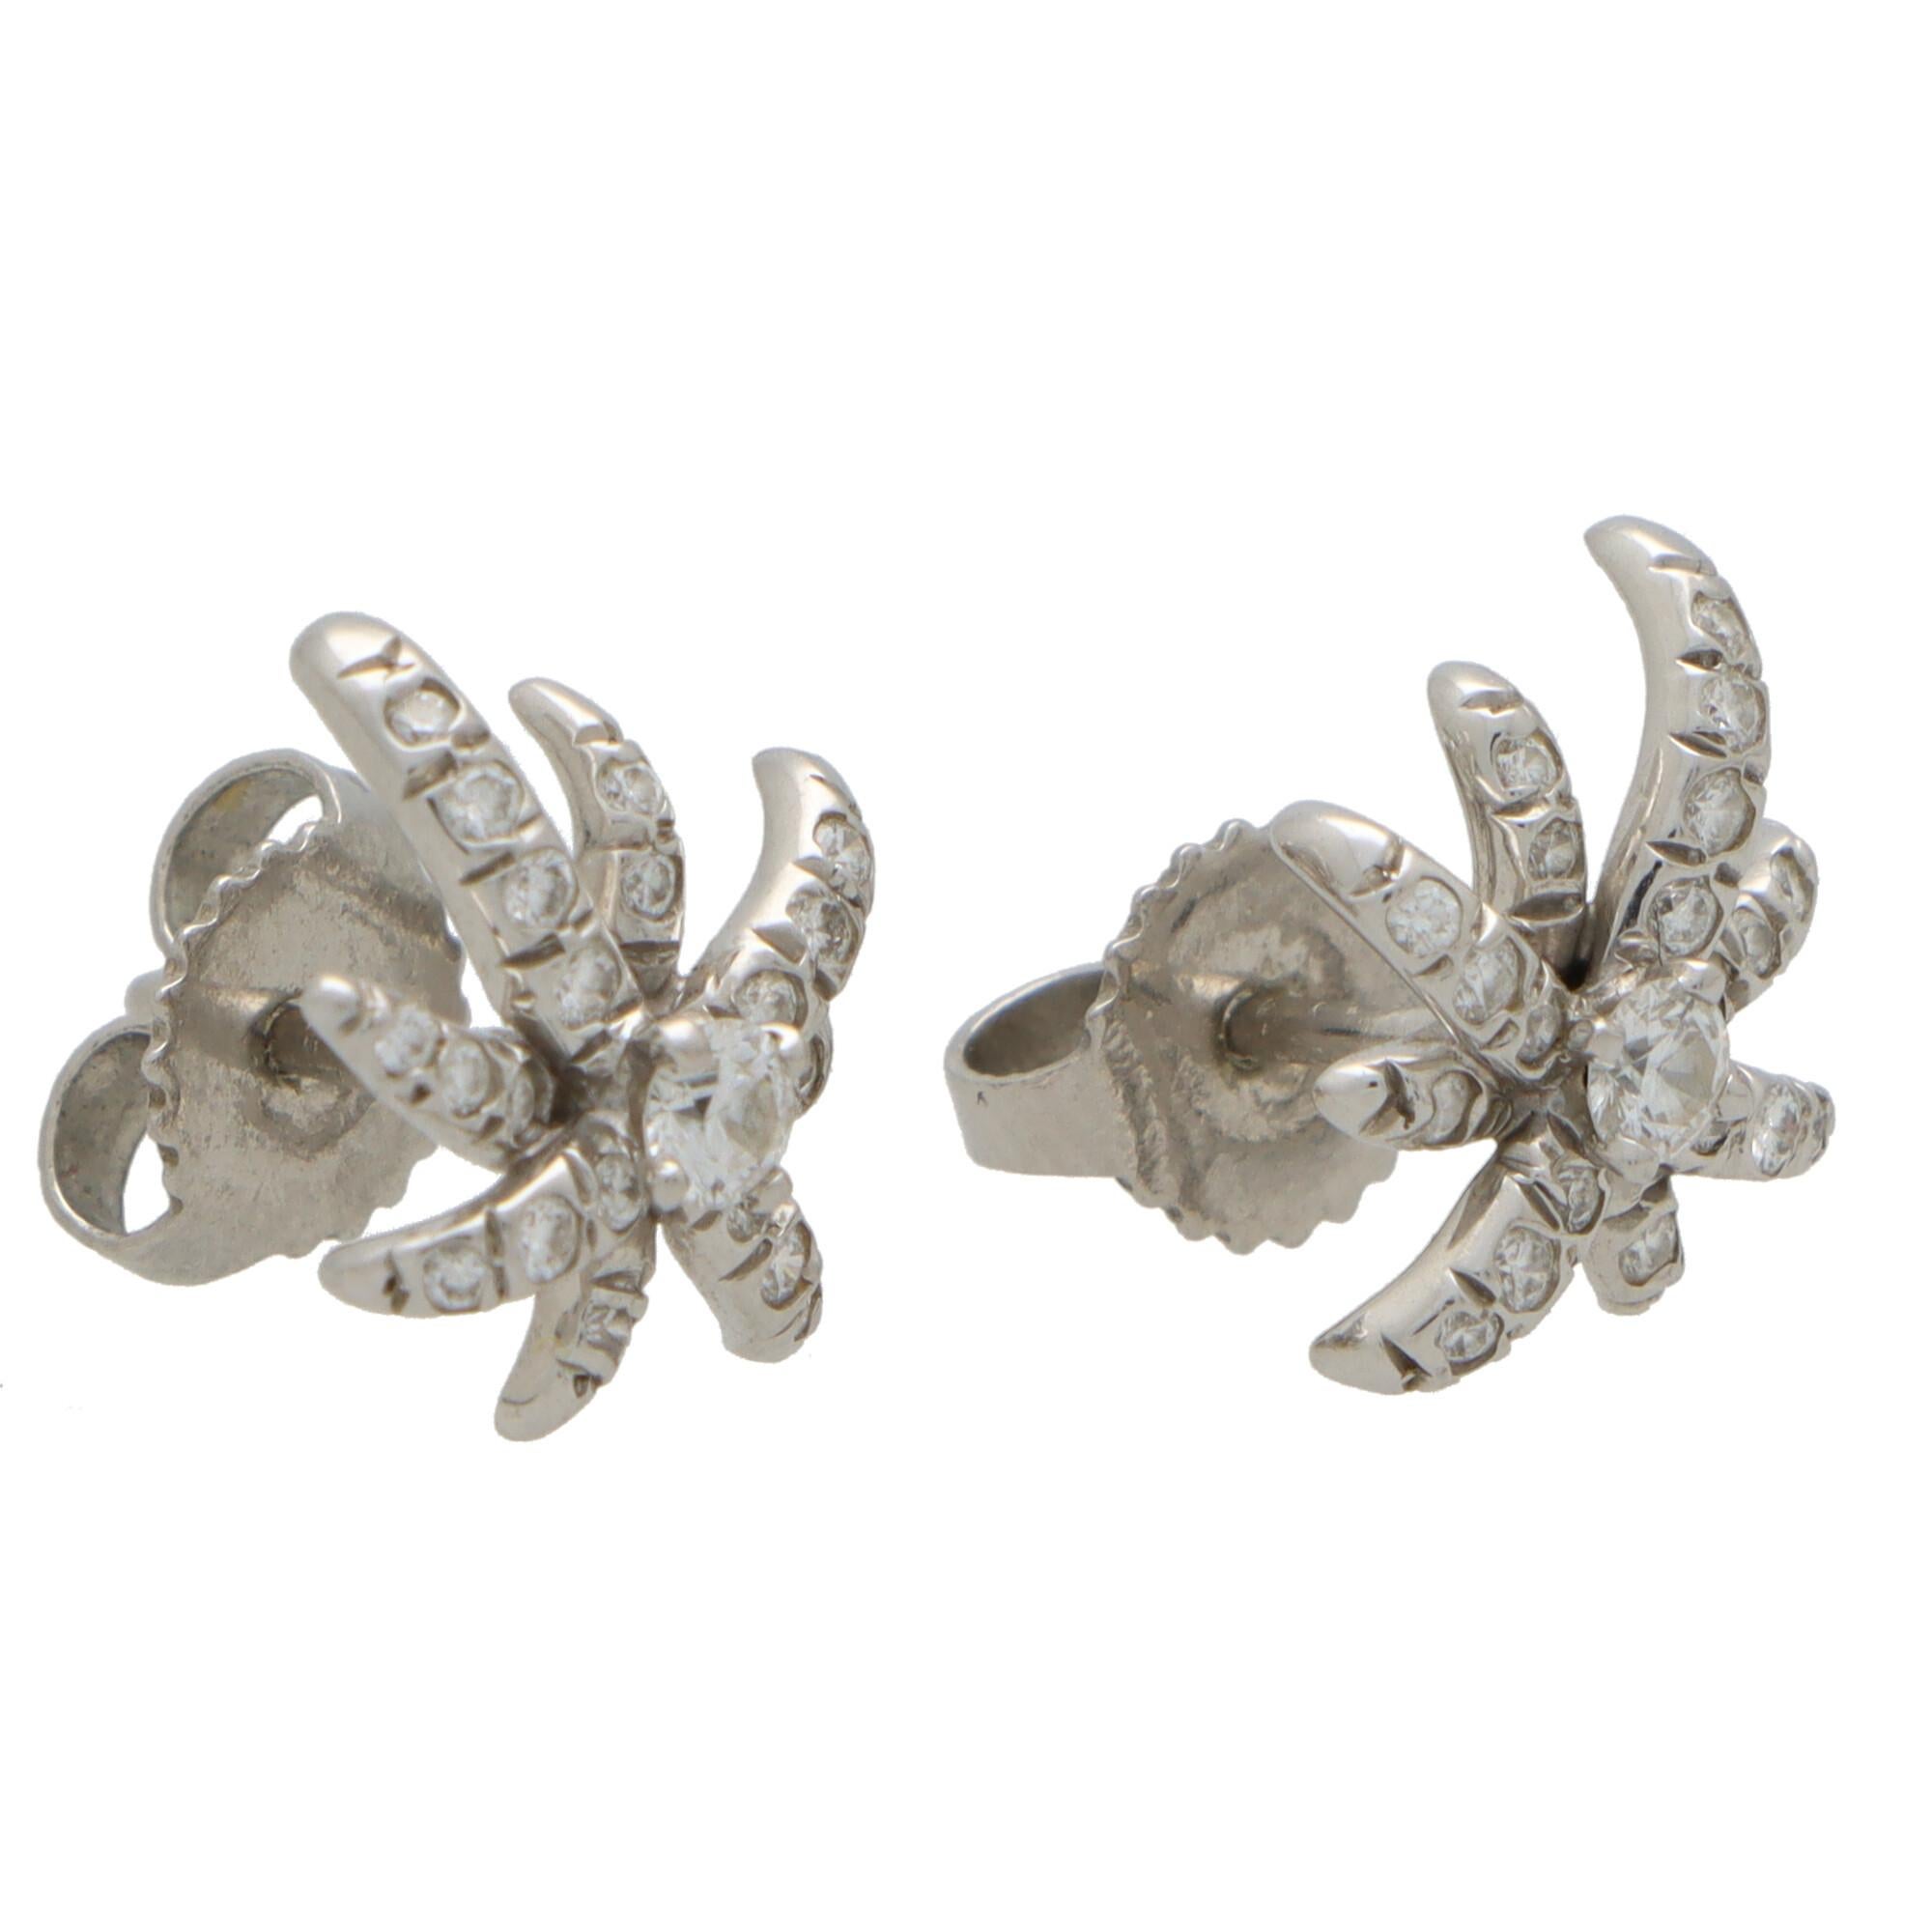 A beautiful pair of vintage Tiffany & Co. ‘Fireworks’ diamond stud earrings set in platinum.

From the now discontinued ‘Fireworks’ collection, each earring is composed of a firework motif which is pave set with round brilliant cut diamonds. Central